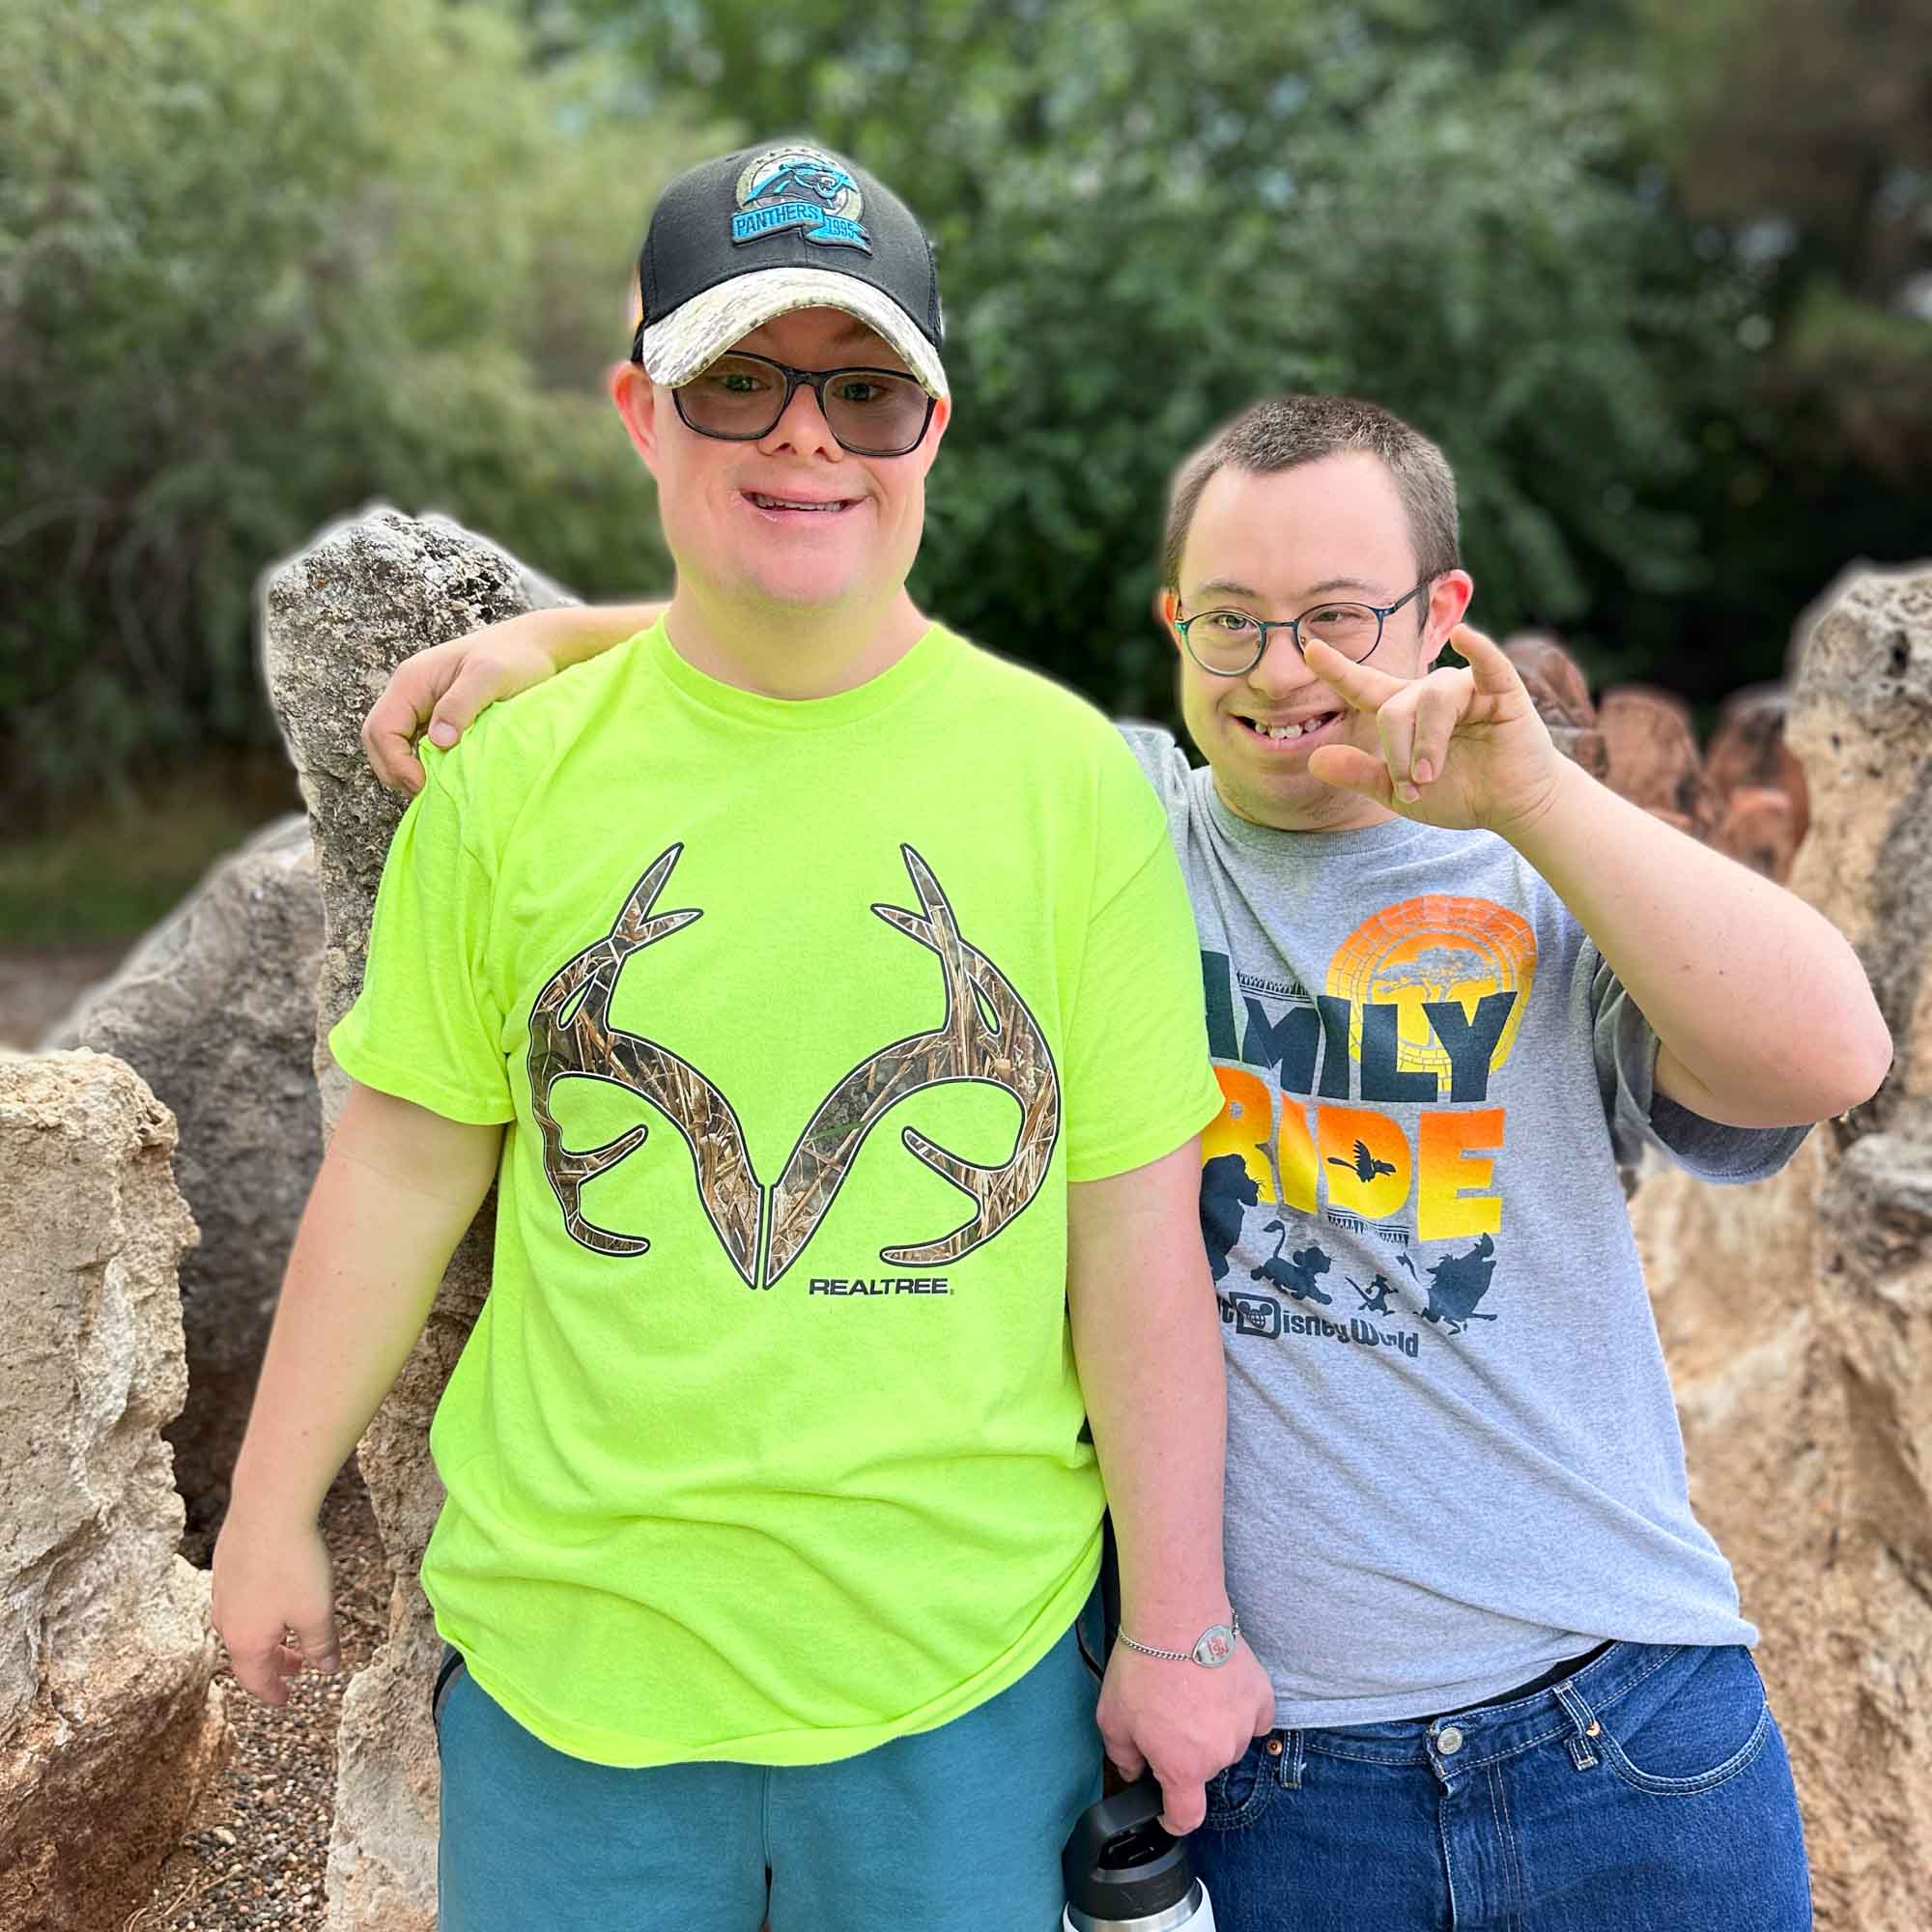 Charlie and Ty pose for a picture on an outing with Rainbow Acres